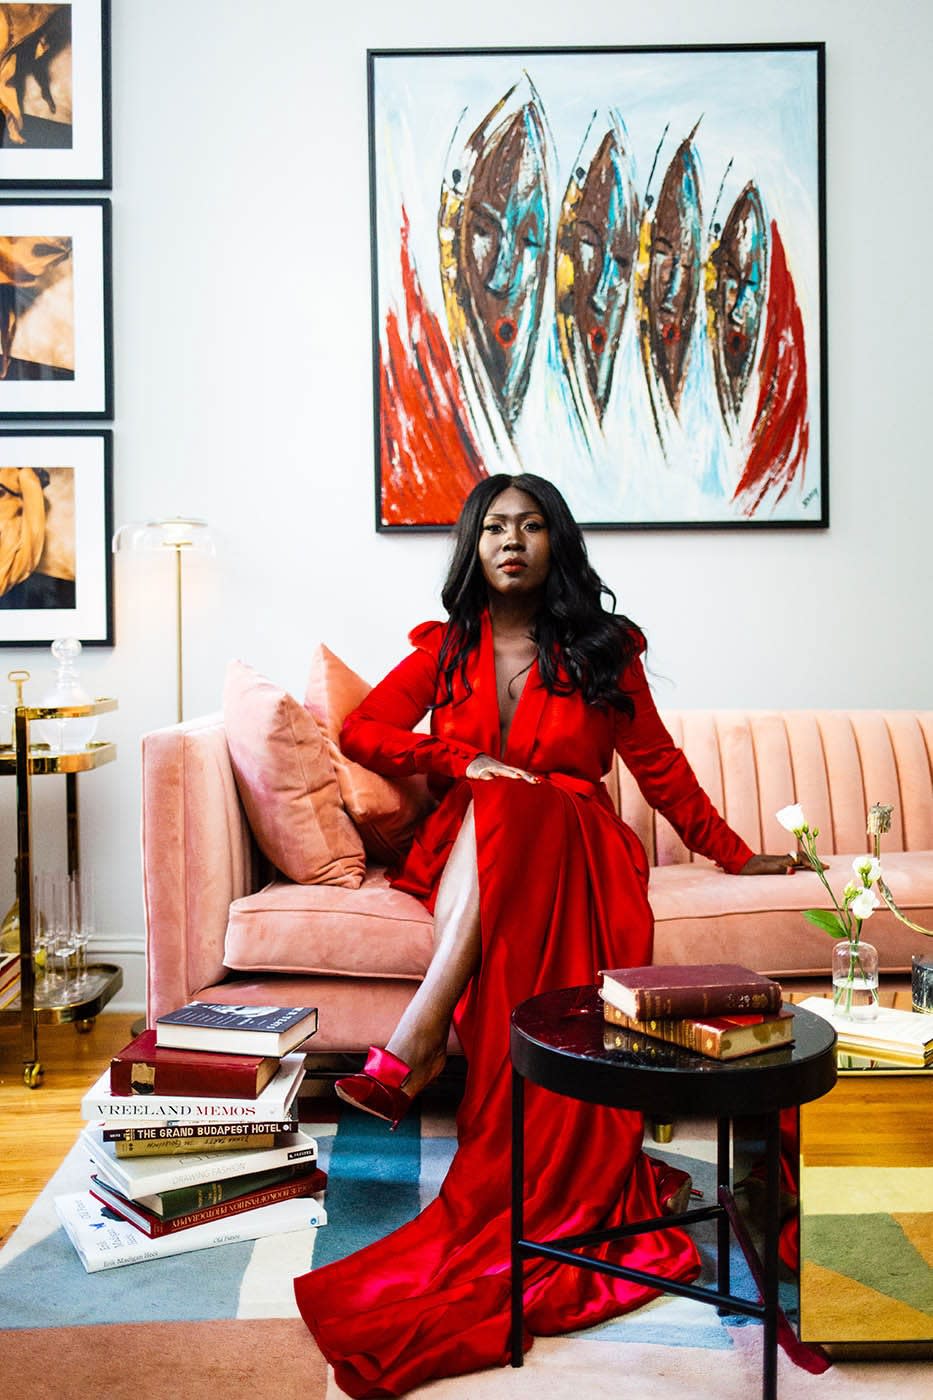 “I knew what I liked,” Natasha says. “I have a midcentury aesthetic, but I’m also eclectic and have a lot of pieces from traveling that don’t adhere to a specific time period or design style. I wanted to marry it all together and evoke eclecticism without feeling untidy or overwhelming.”